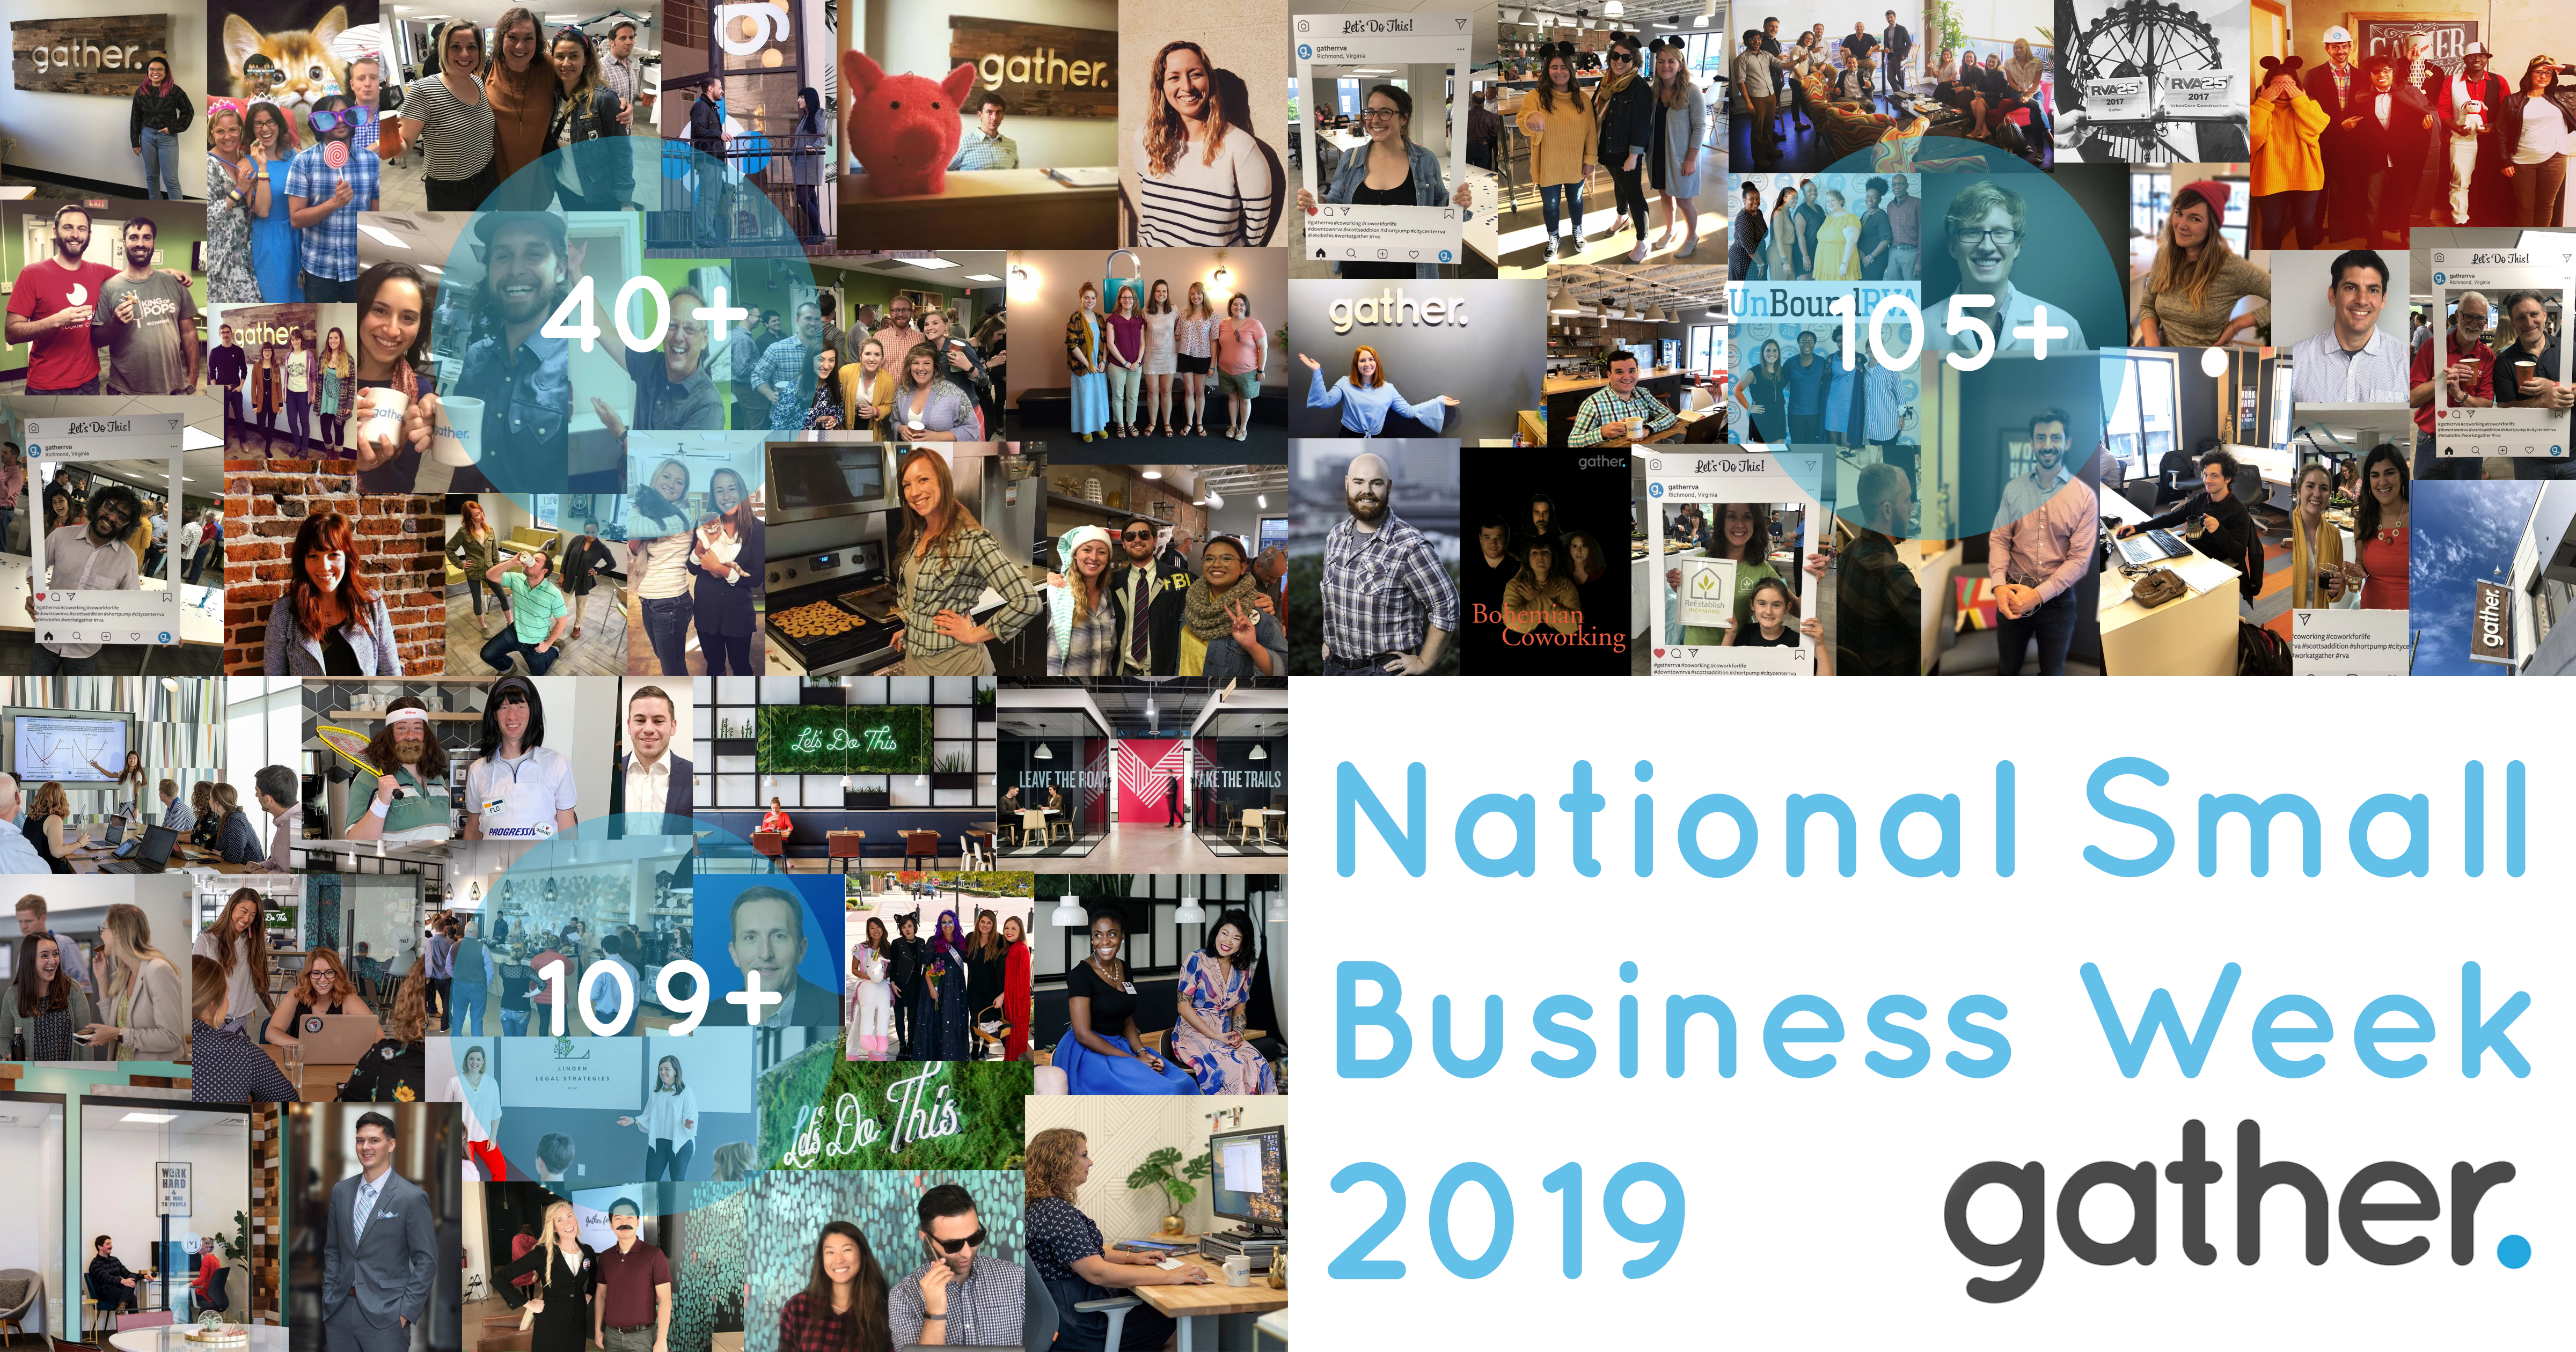 National Small Business Week 2019 Gather